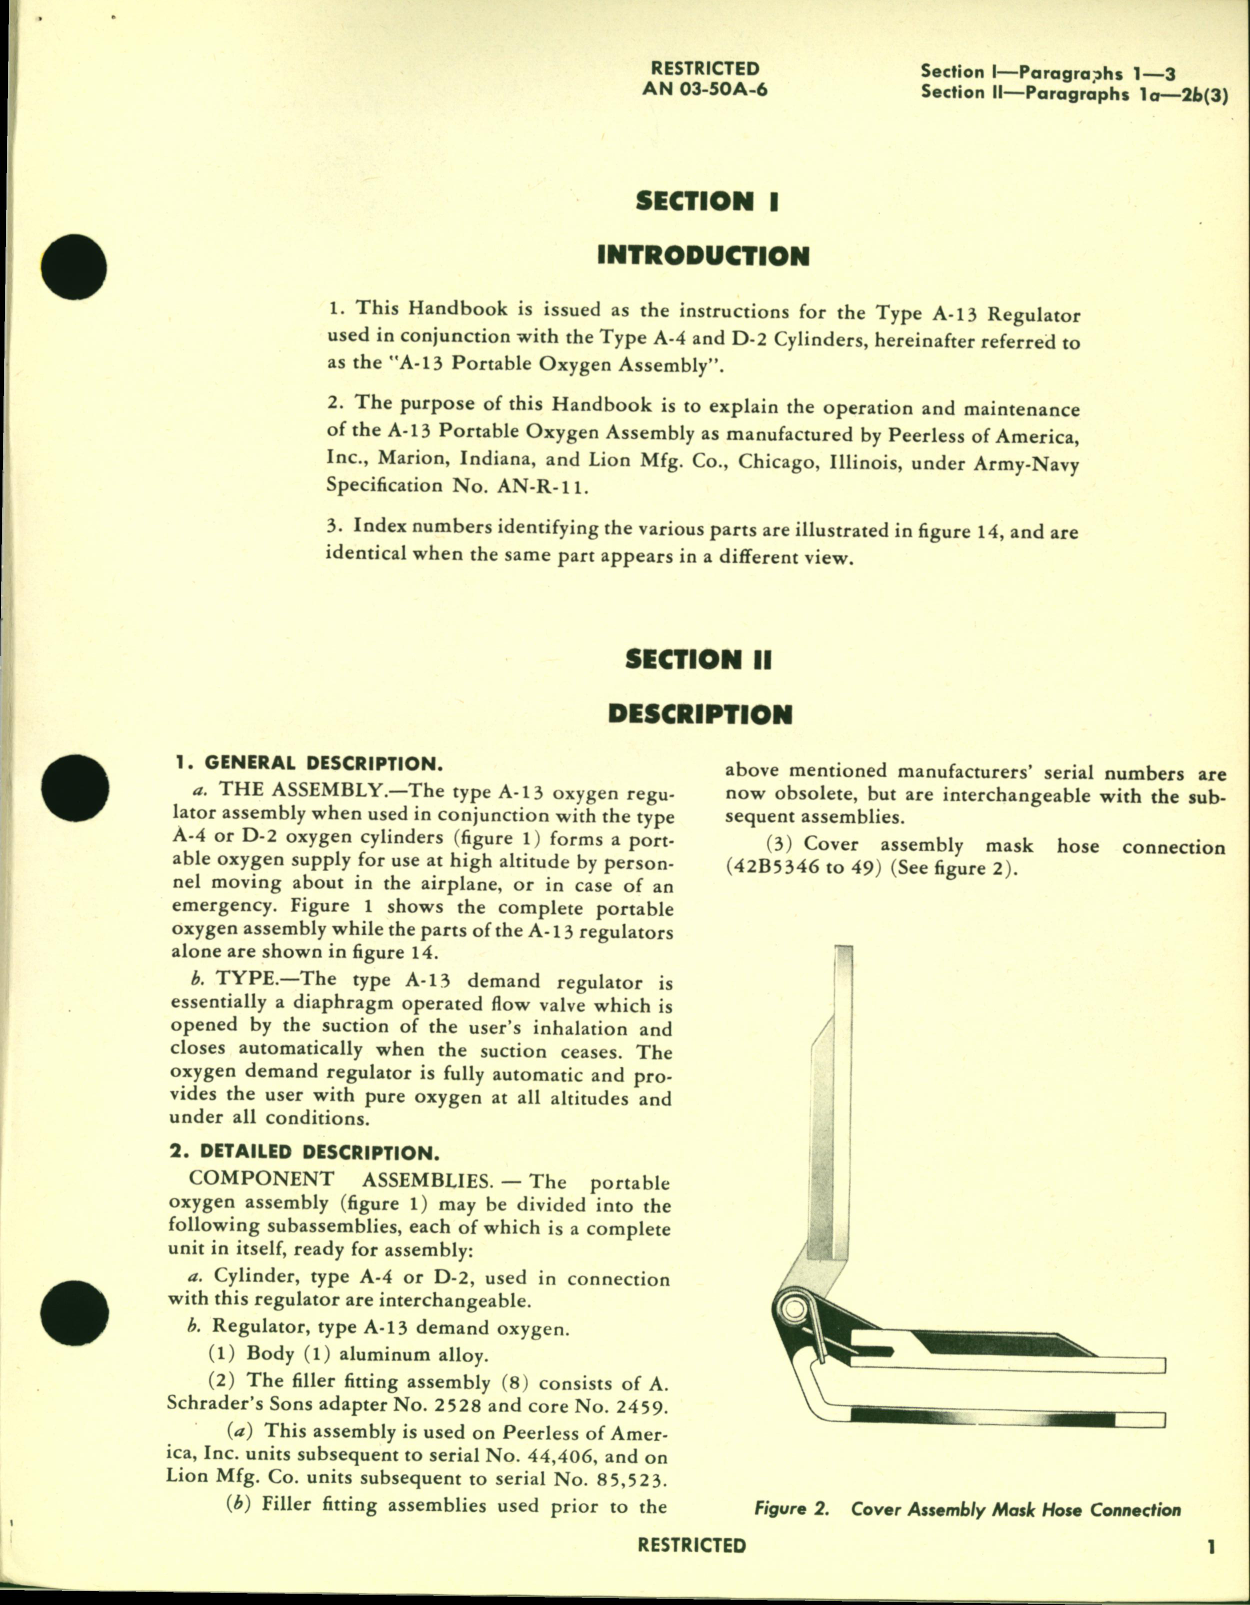 Sample page 5 from AirCorps Library document: Operation, Service and Overhaul Instructions with Parts Catalog for Portable Oxygen Demand Regulator Type A-13